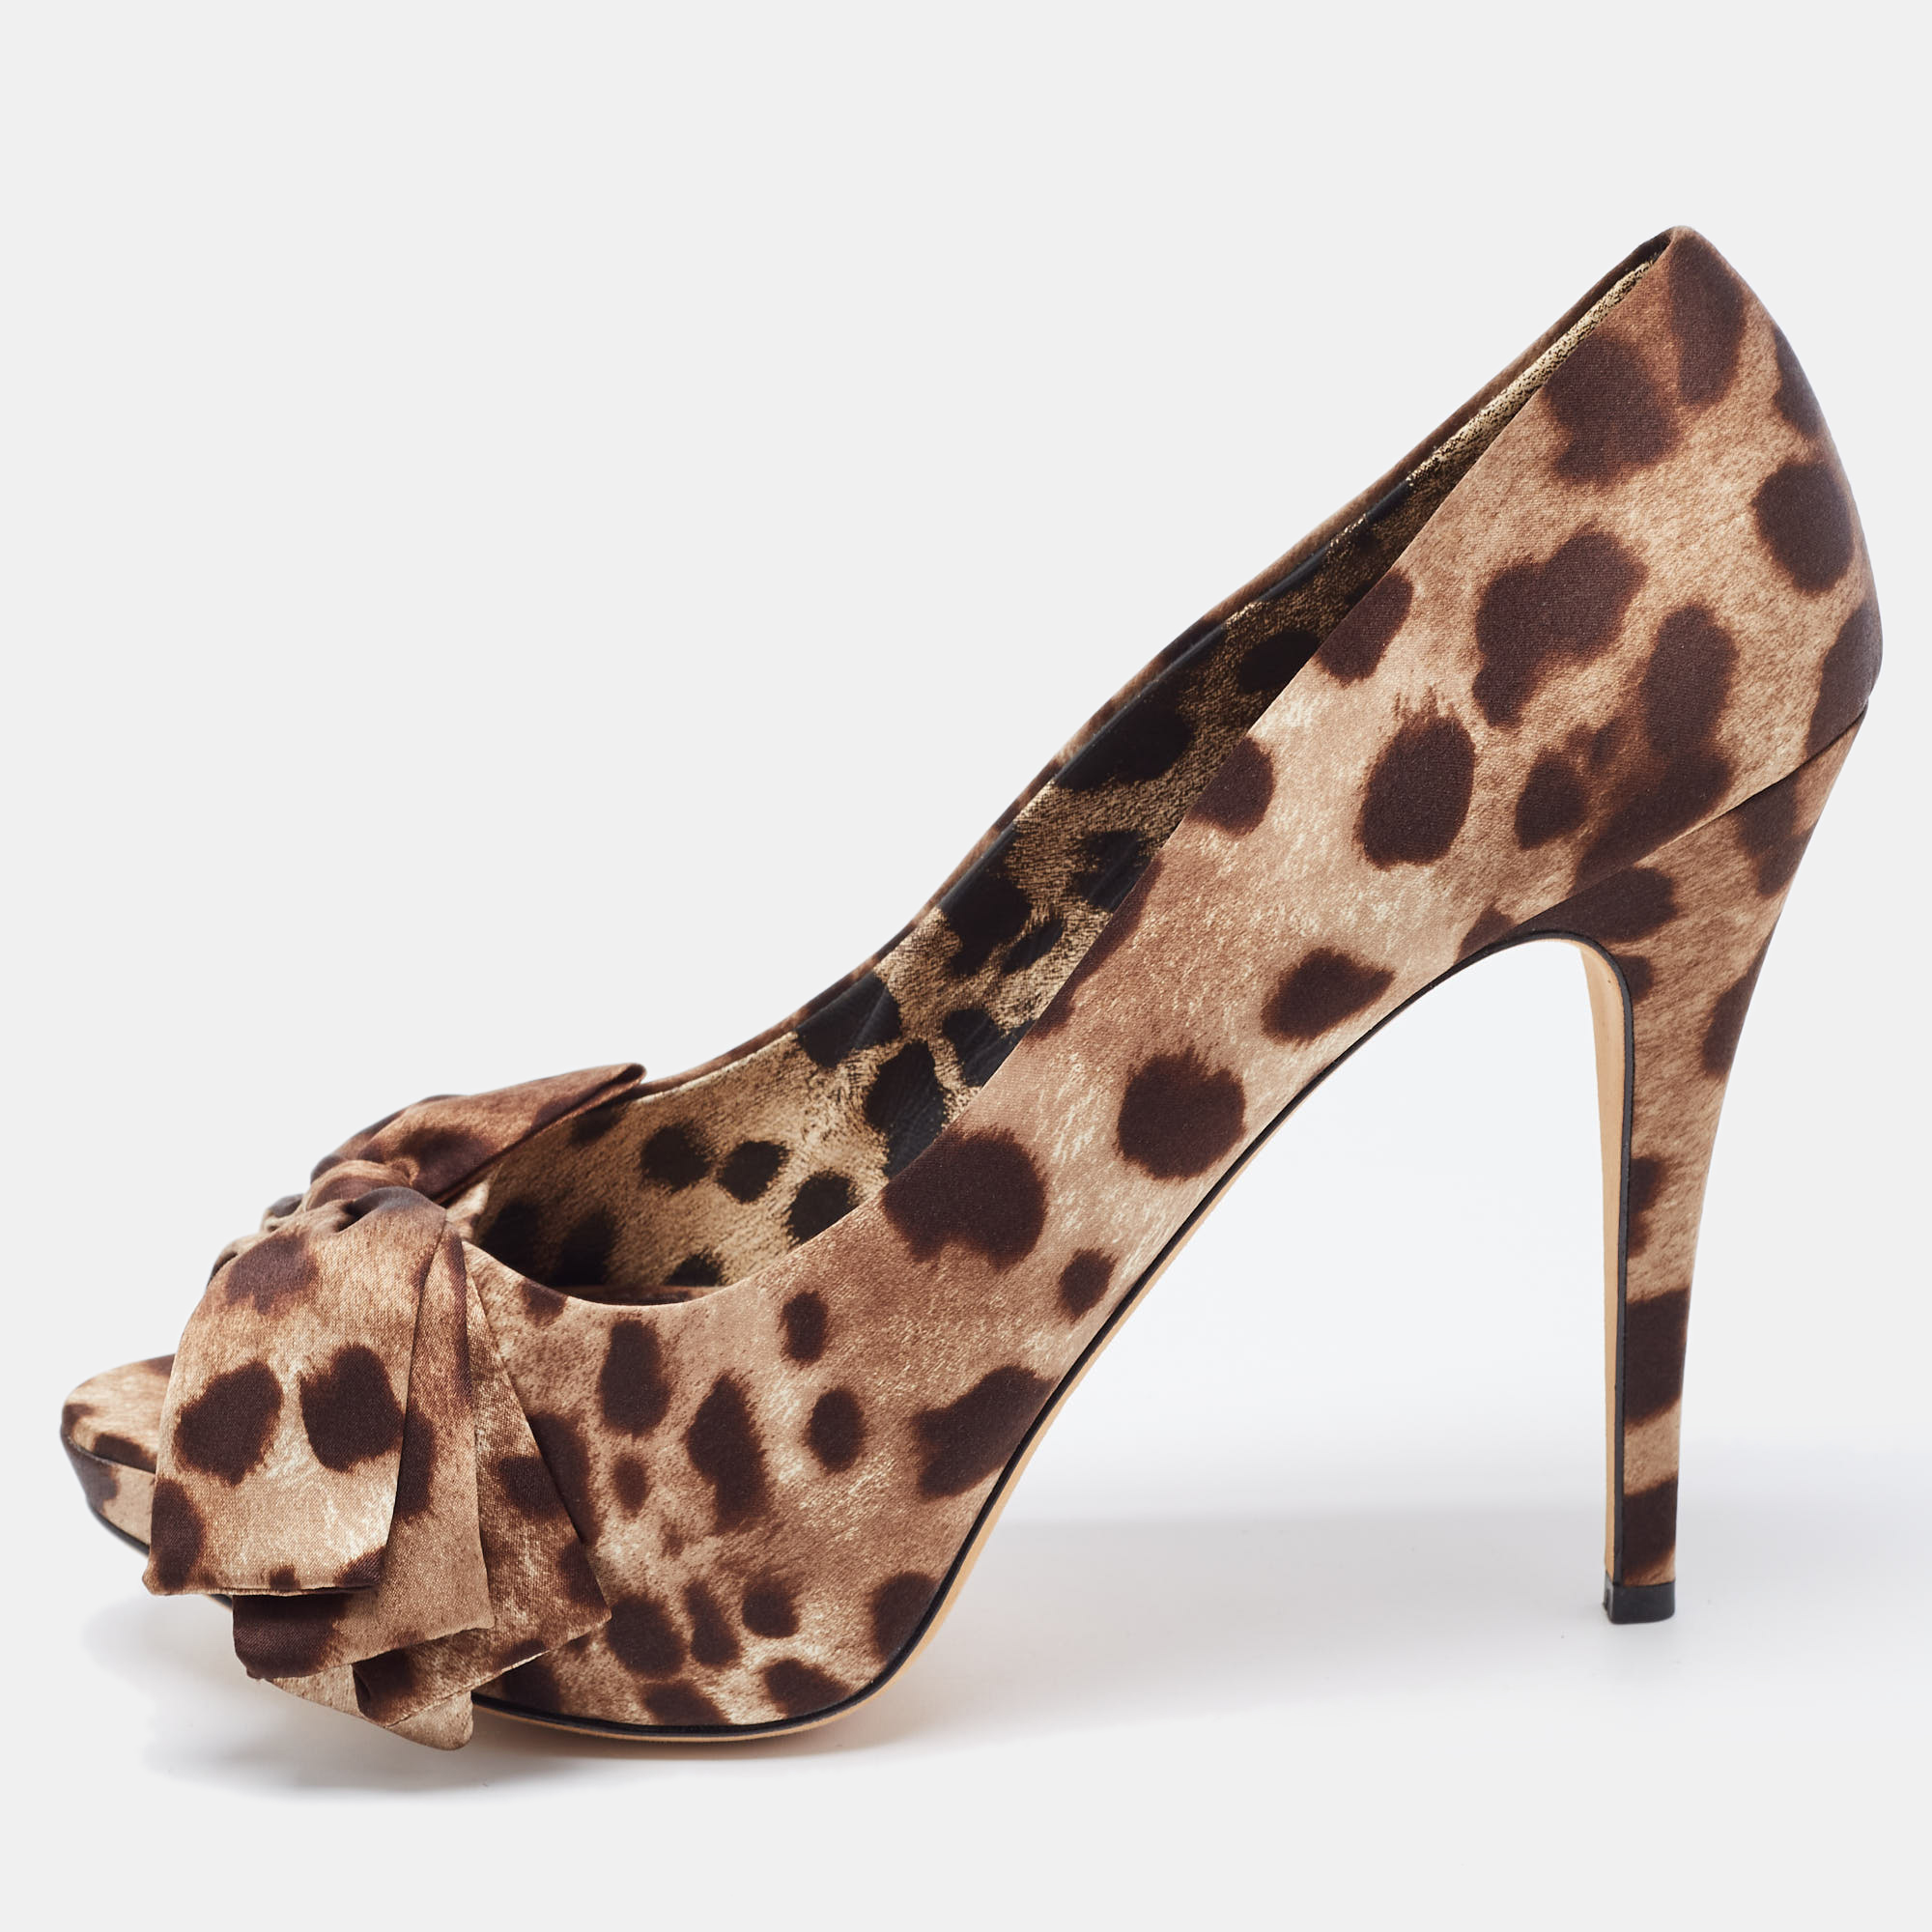 Pre-owned Dolce & Gabbana Brown/beige Leopard Print Satin Bow Peep Toe Pumps Size 41